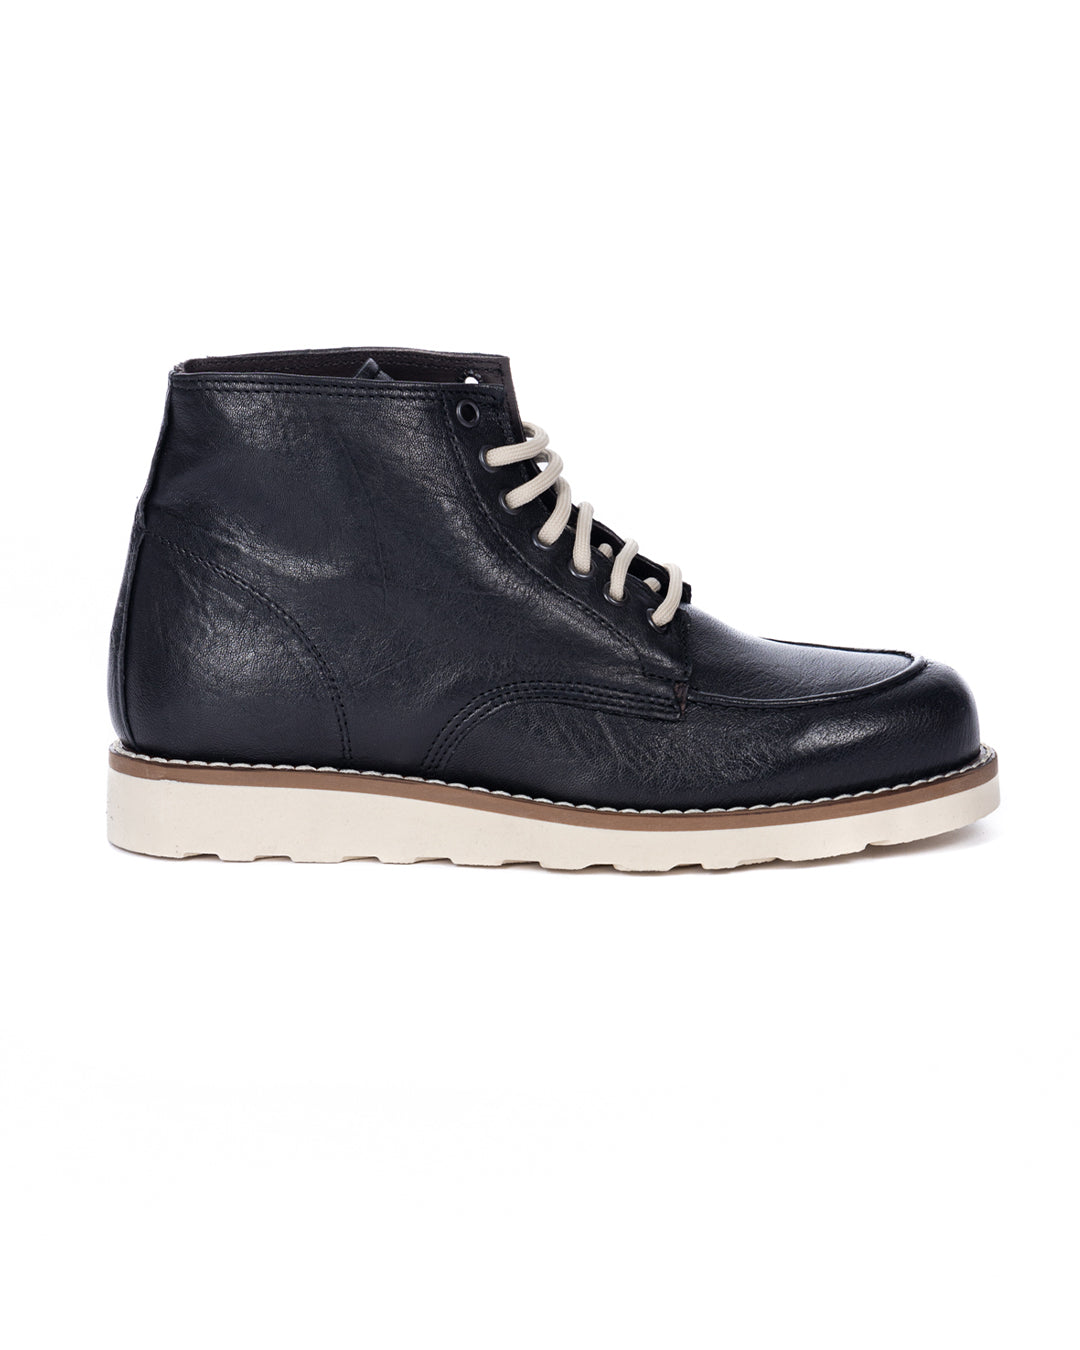 Moon - black leather boot